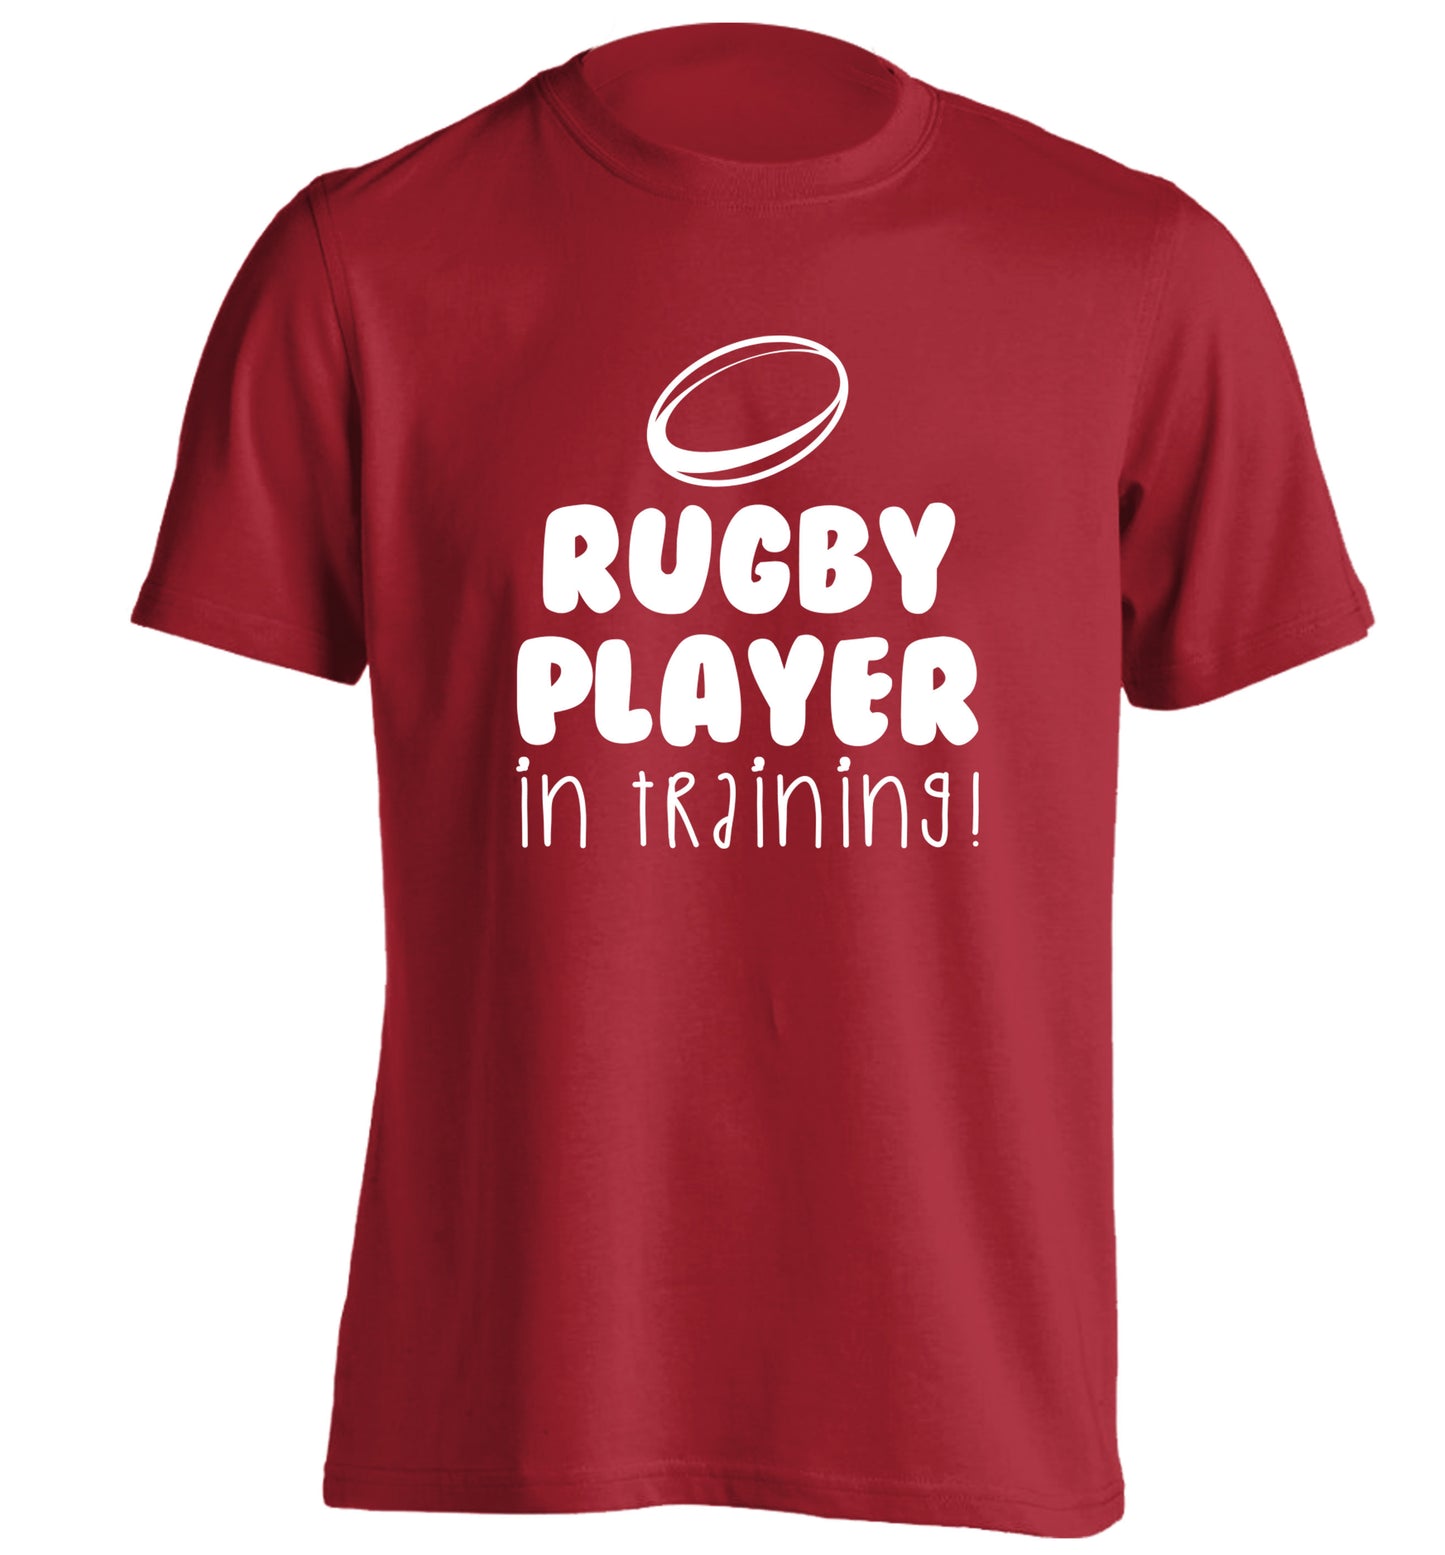 Rugby player in training adults unisex red Tshirt 2XL